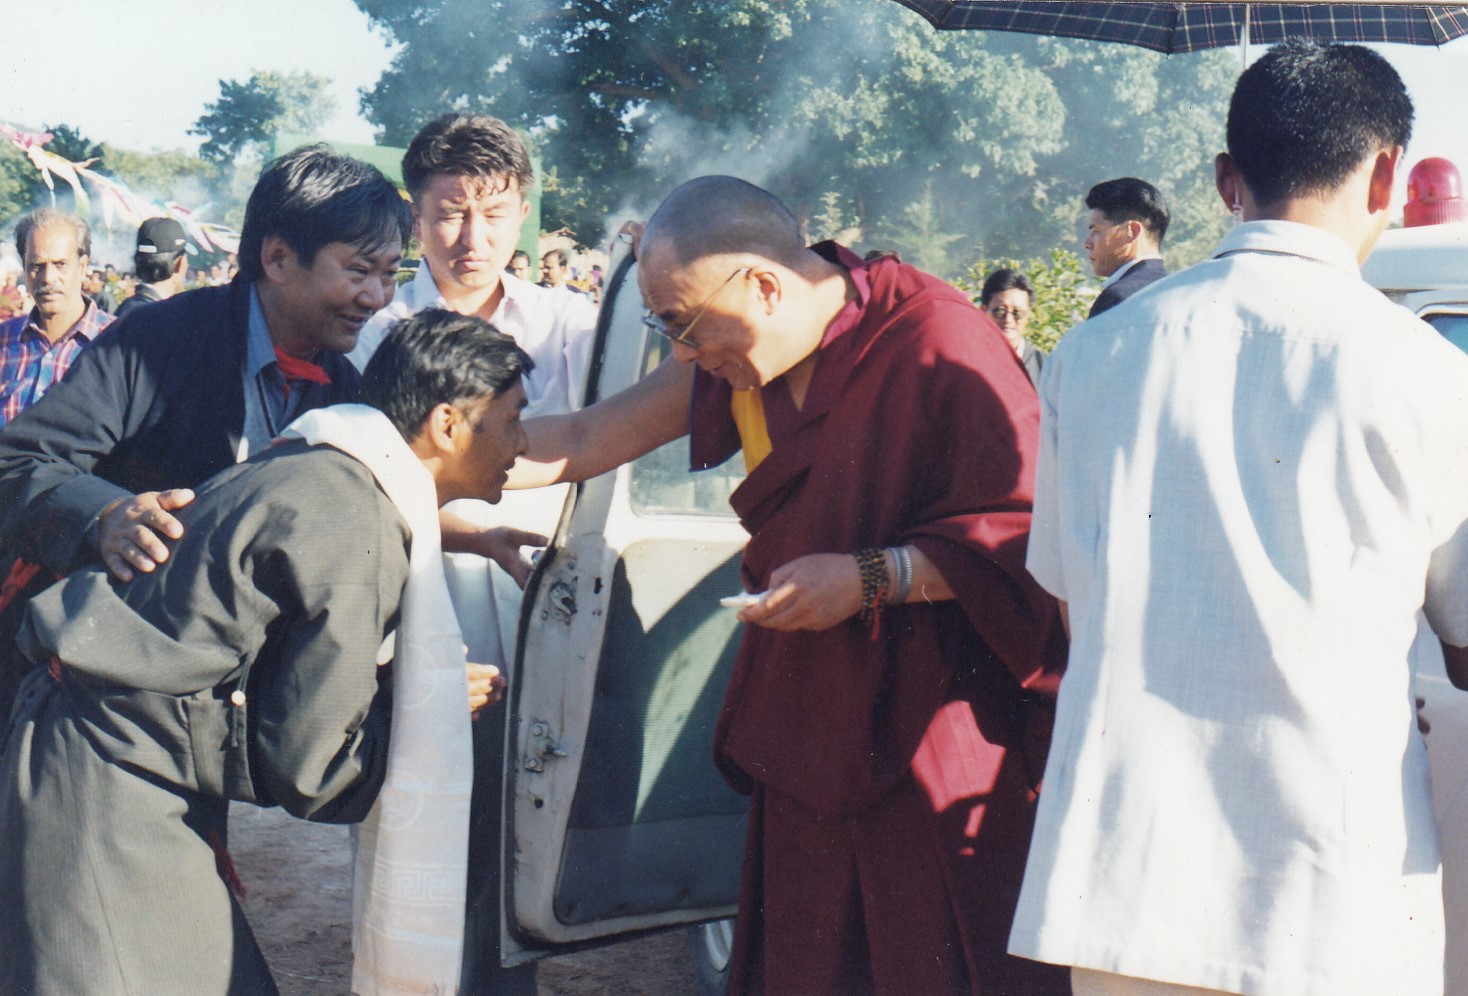 Mr. Tsering Dorjee, Agriculture Extension Officer, welcoming His Holiness the 14th Dalai Lama at Orissa Phuntsokling Tibetan settlement in 1998. 